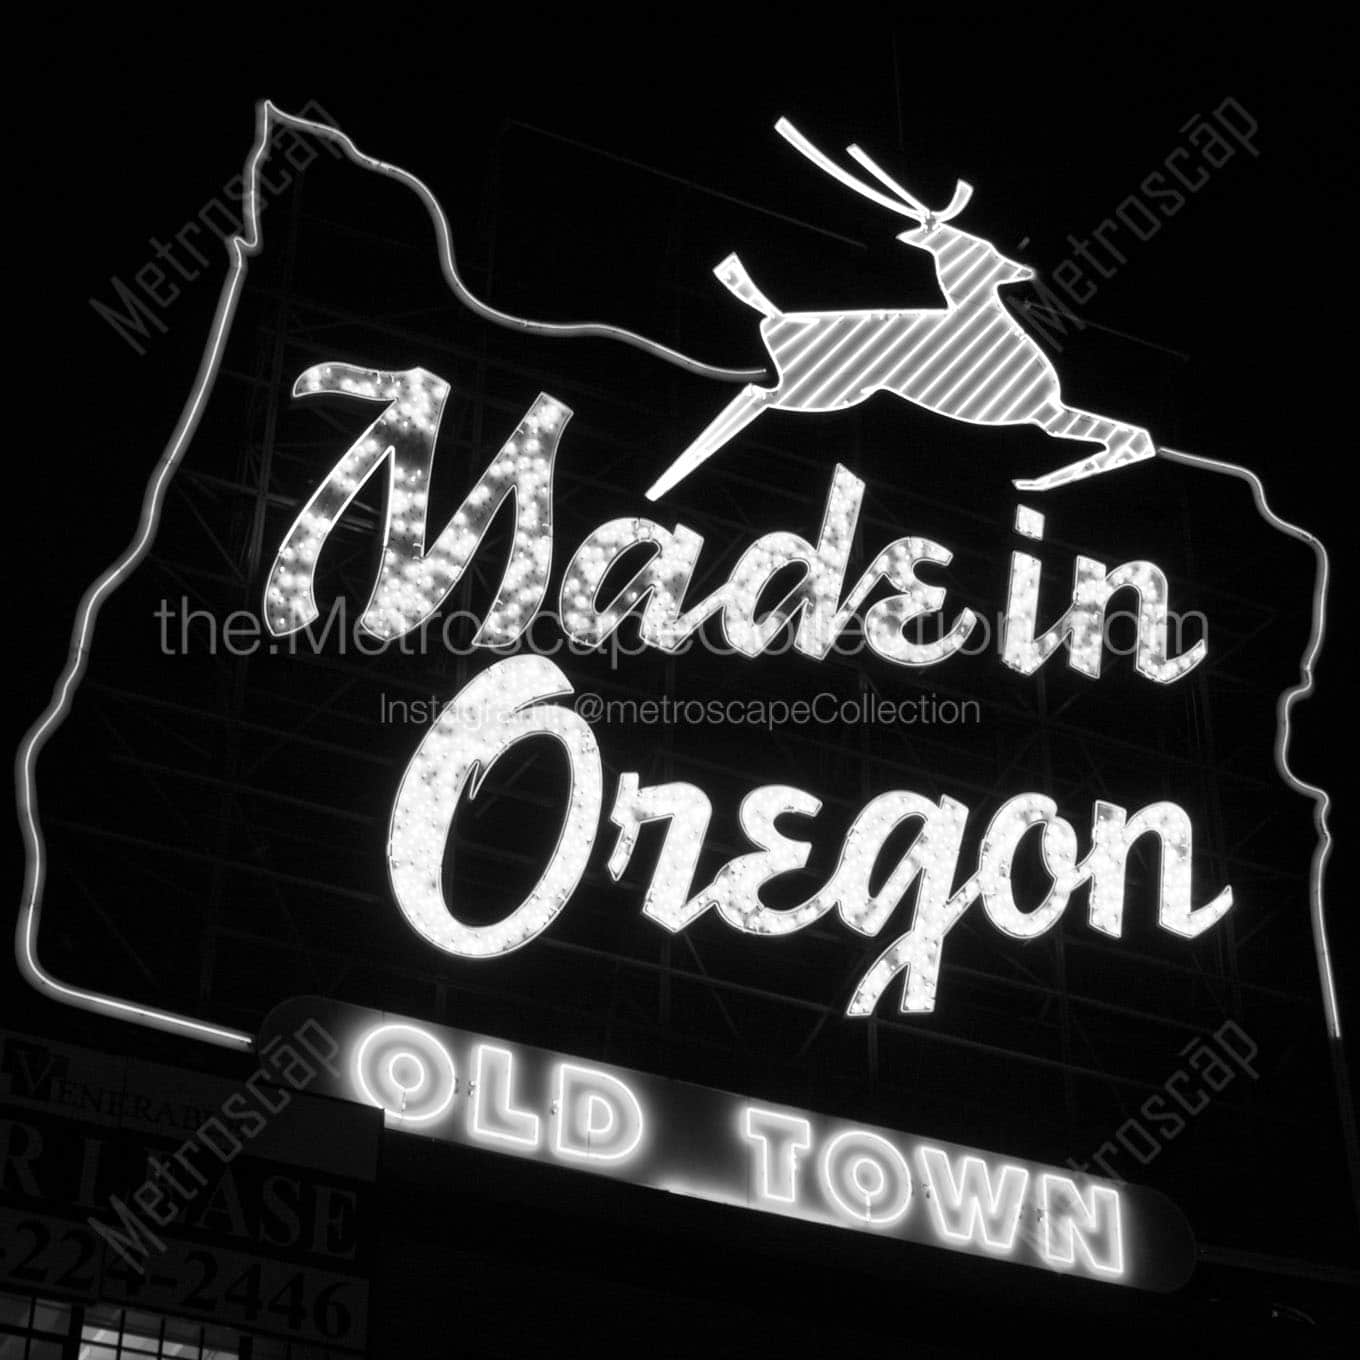 made in oregon sign Black & White Wall Art